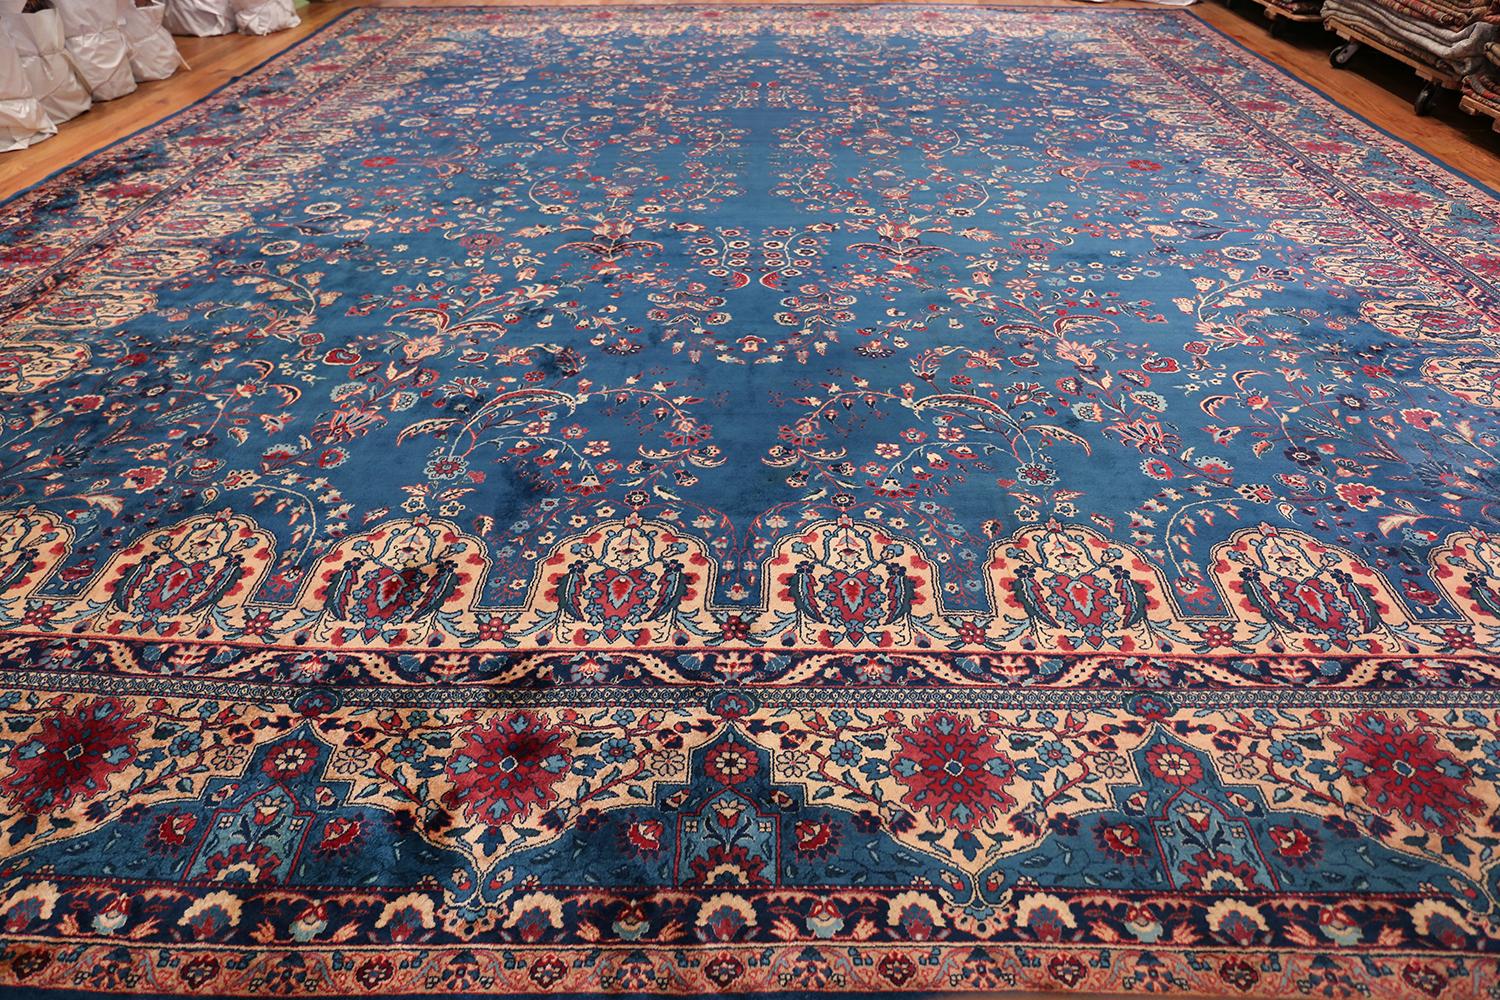 Breathtaking blue oversize floral antique Indian rug, country of origin / rug type: India, date: circa 1920. Size: 17 ft x 20 ft 10 in (5.18 m x 6.35 m)

Vibrant blues and stunning reds create the impression of a formal reflecting pool in this